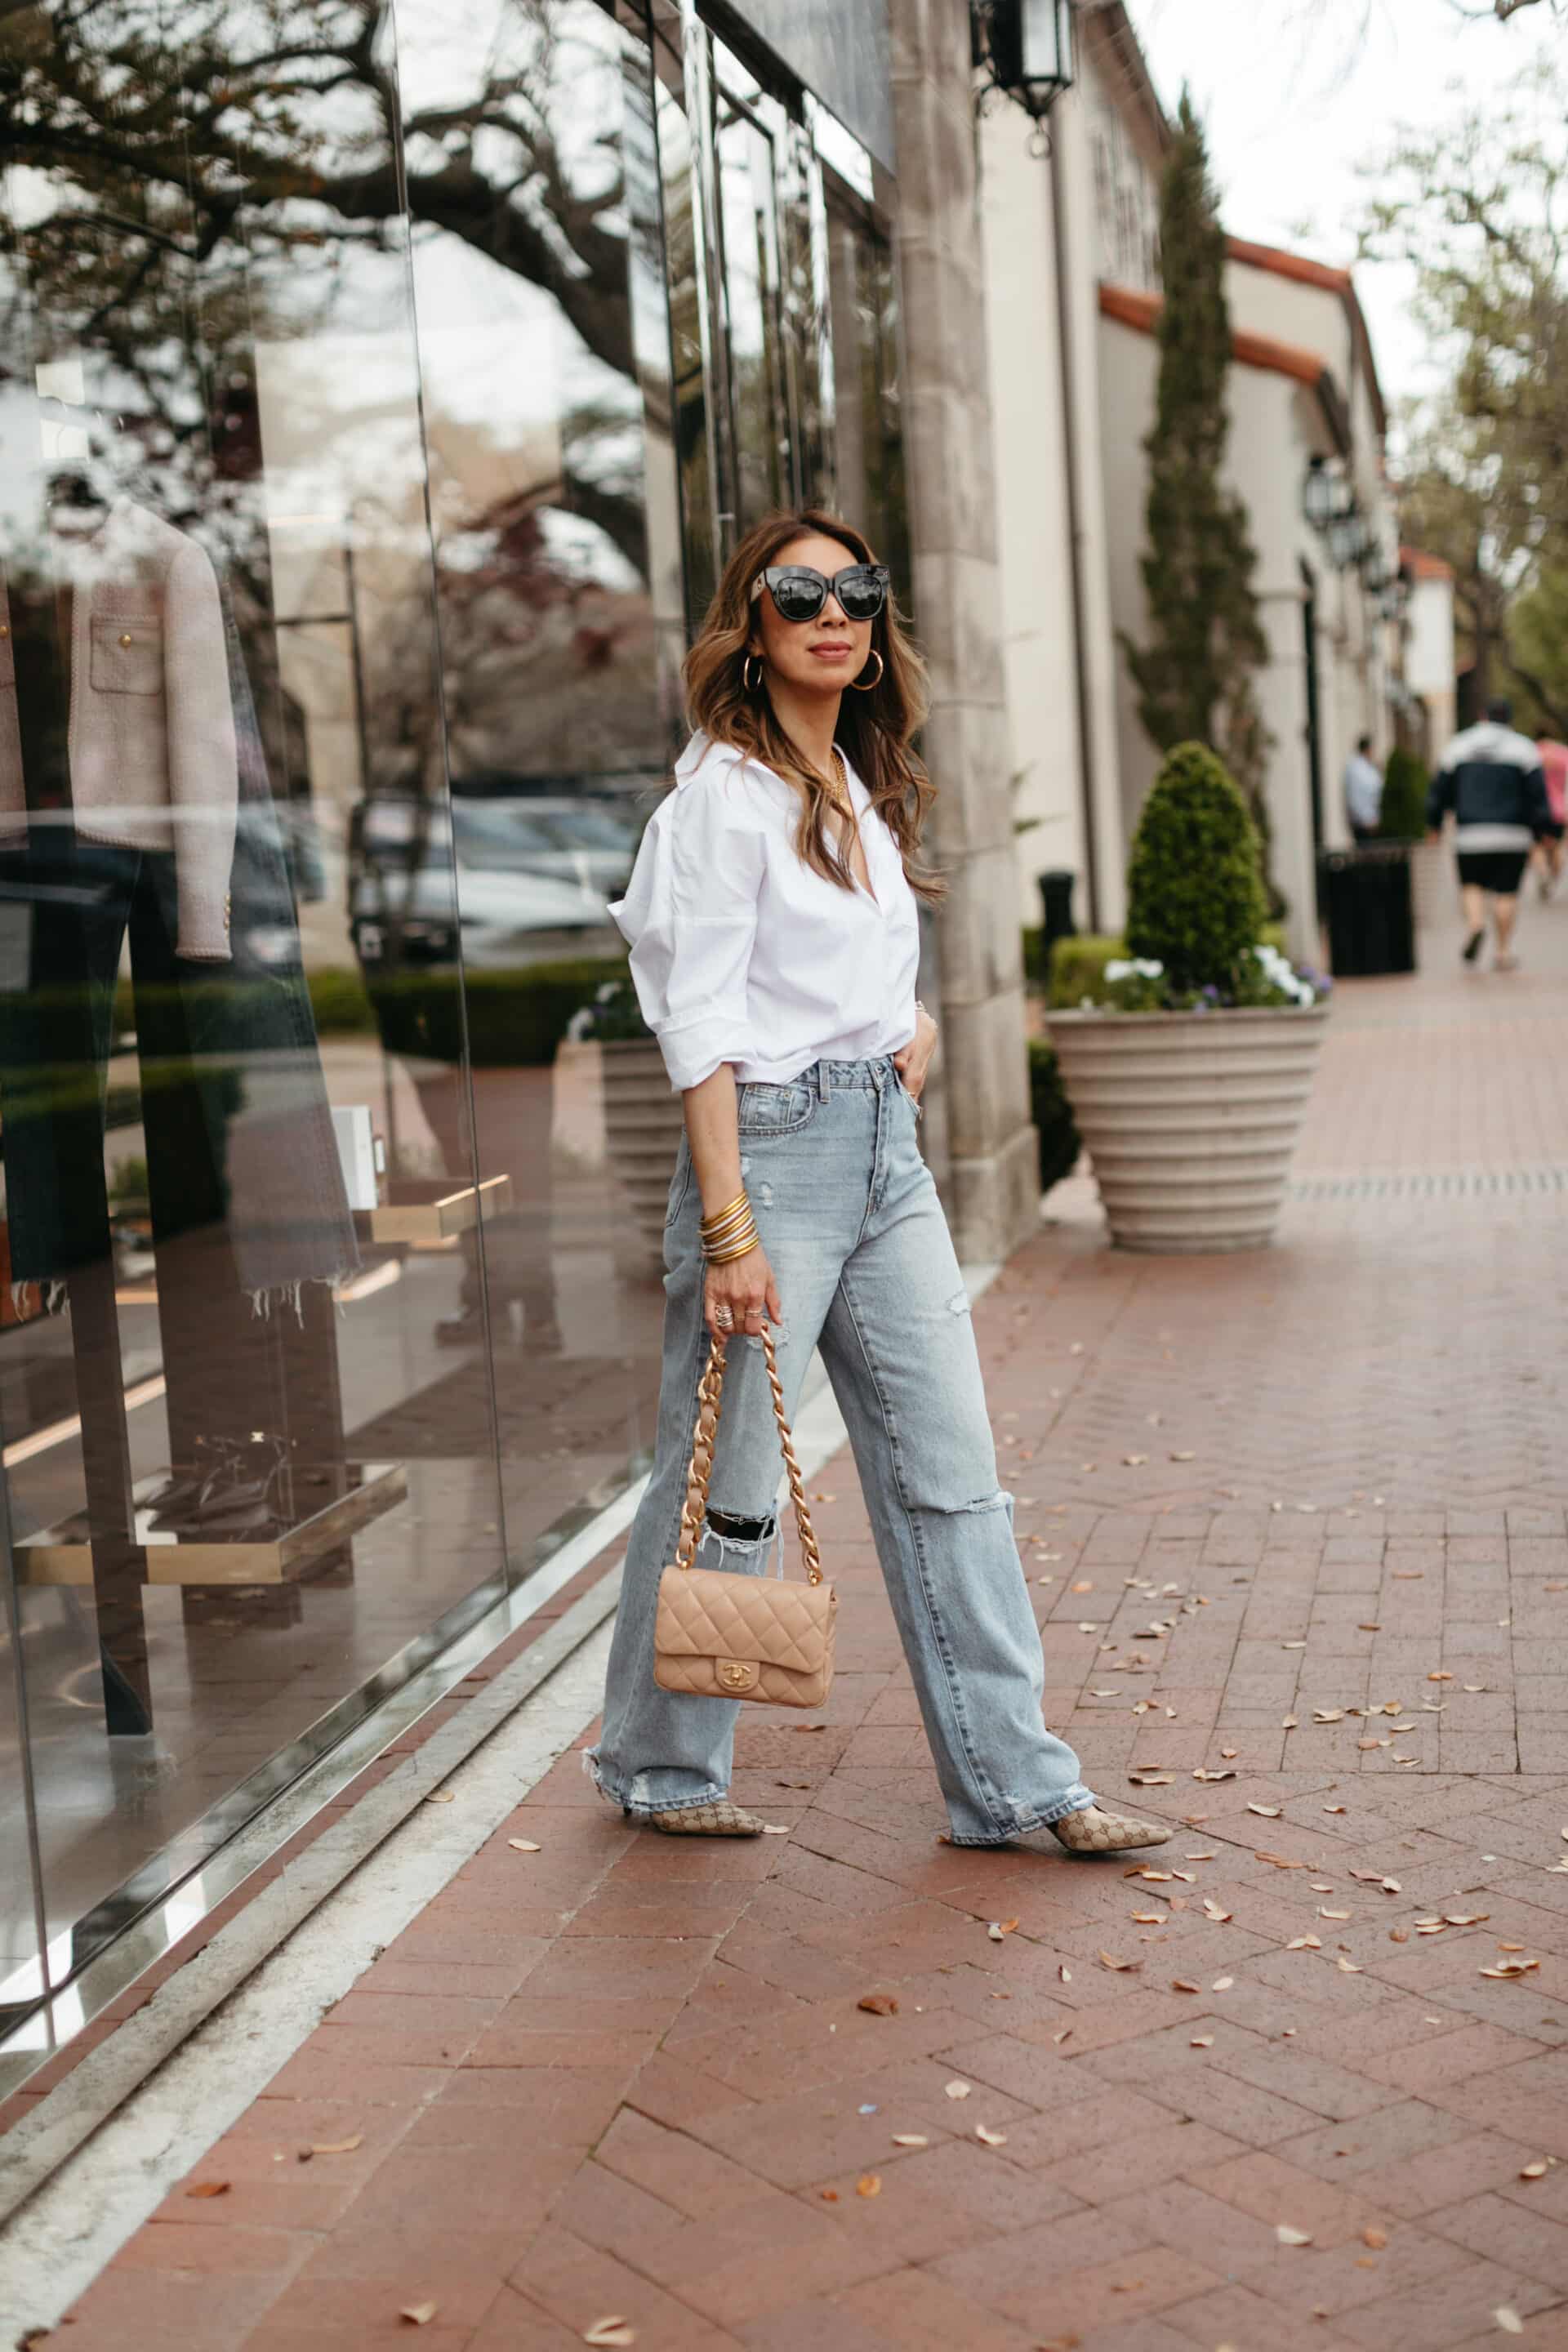 Styling white shirt and Jeans with Chanel bag